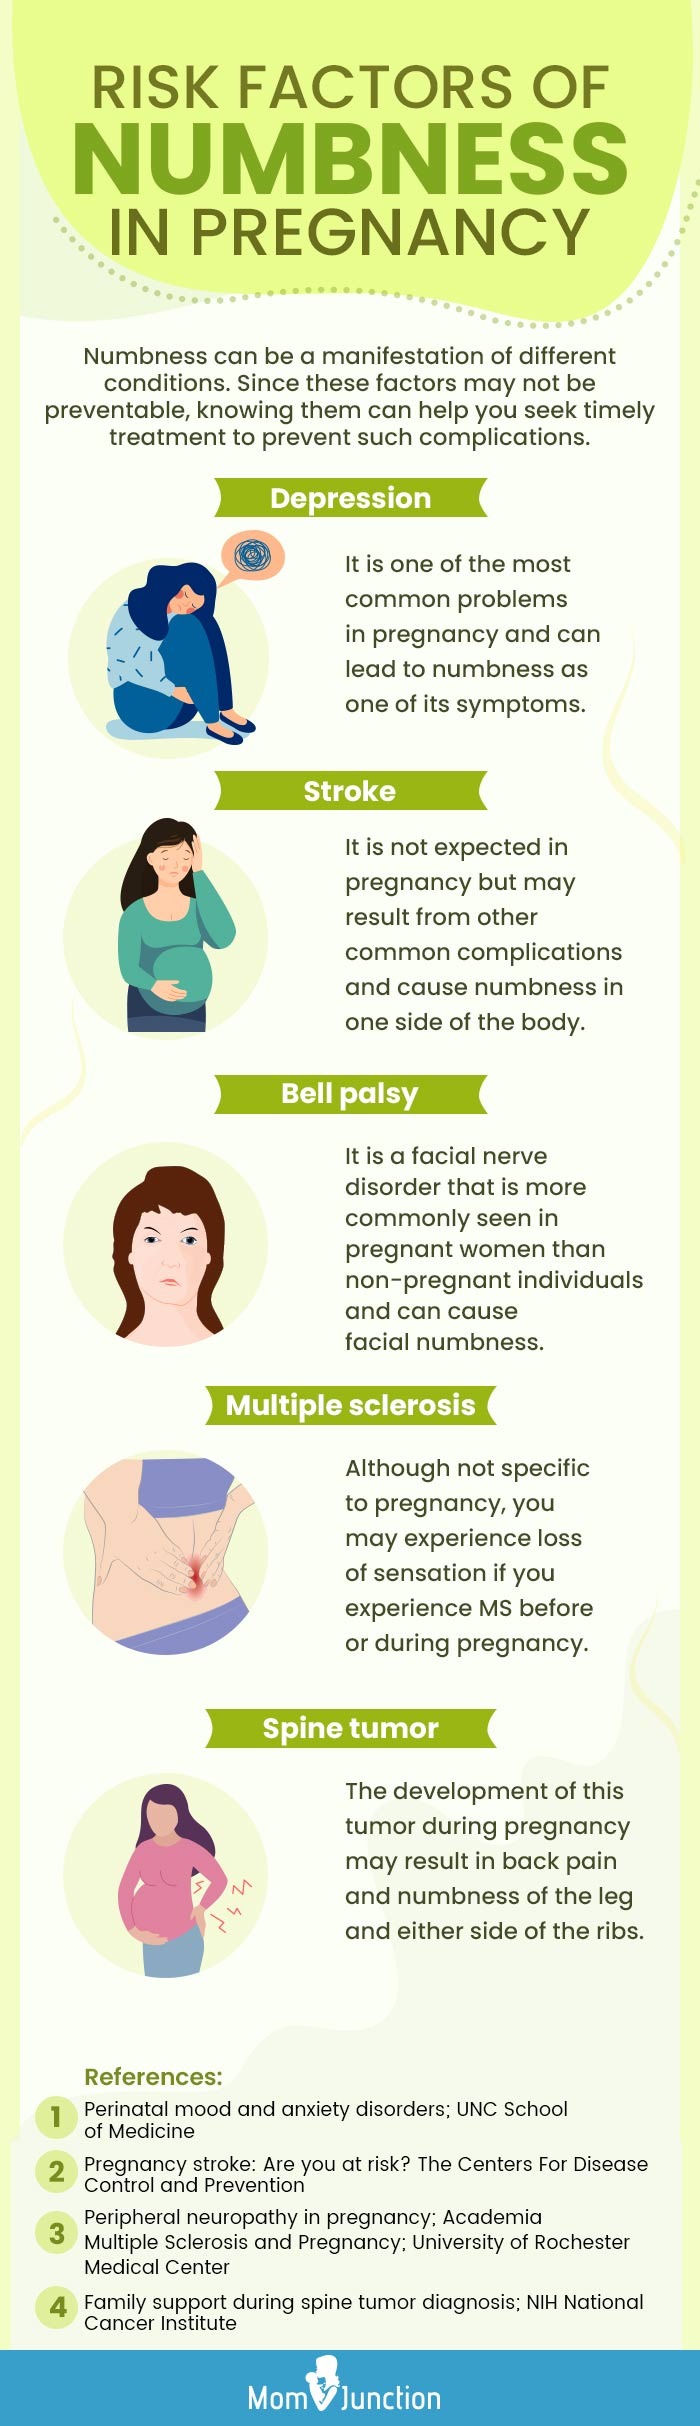 risk factors of numbness in pregnancy (infographic)